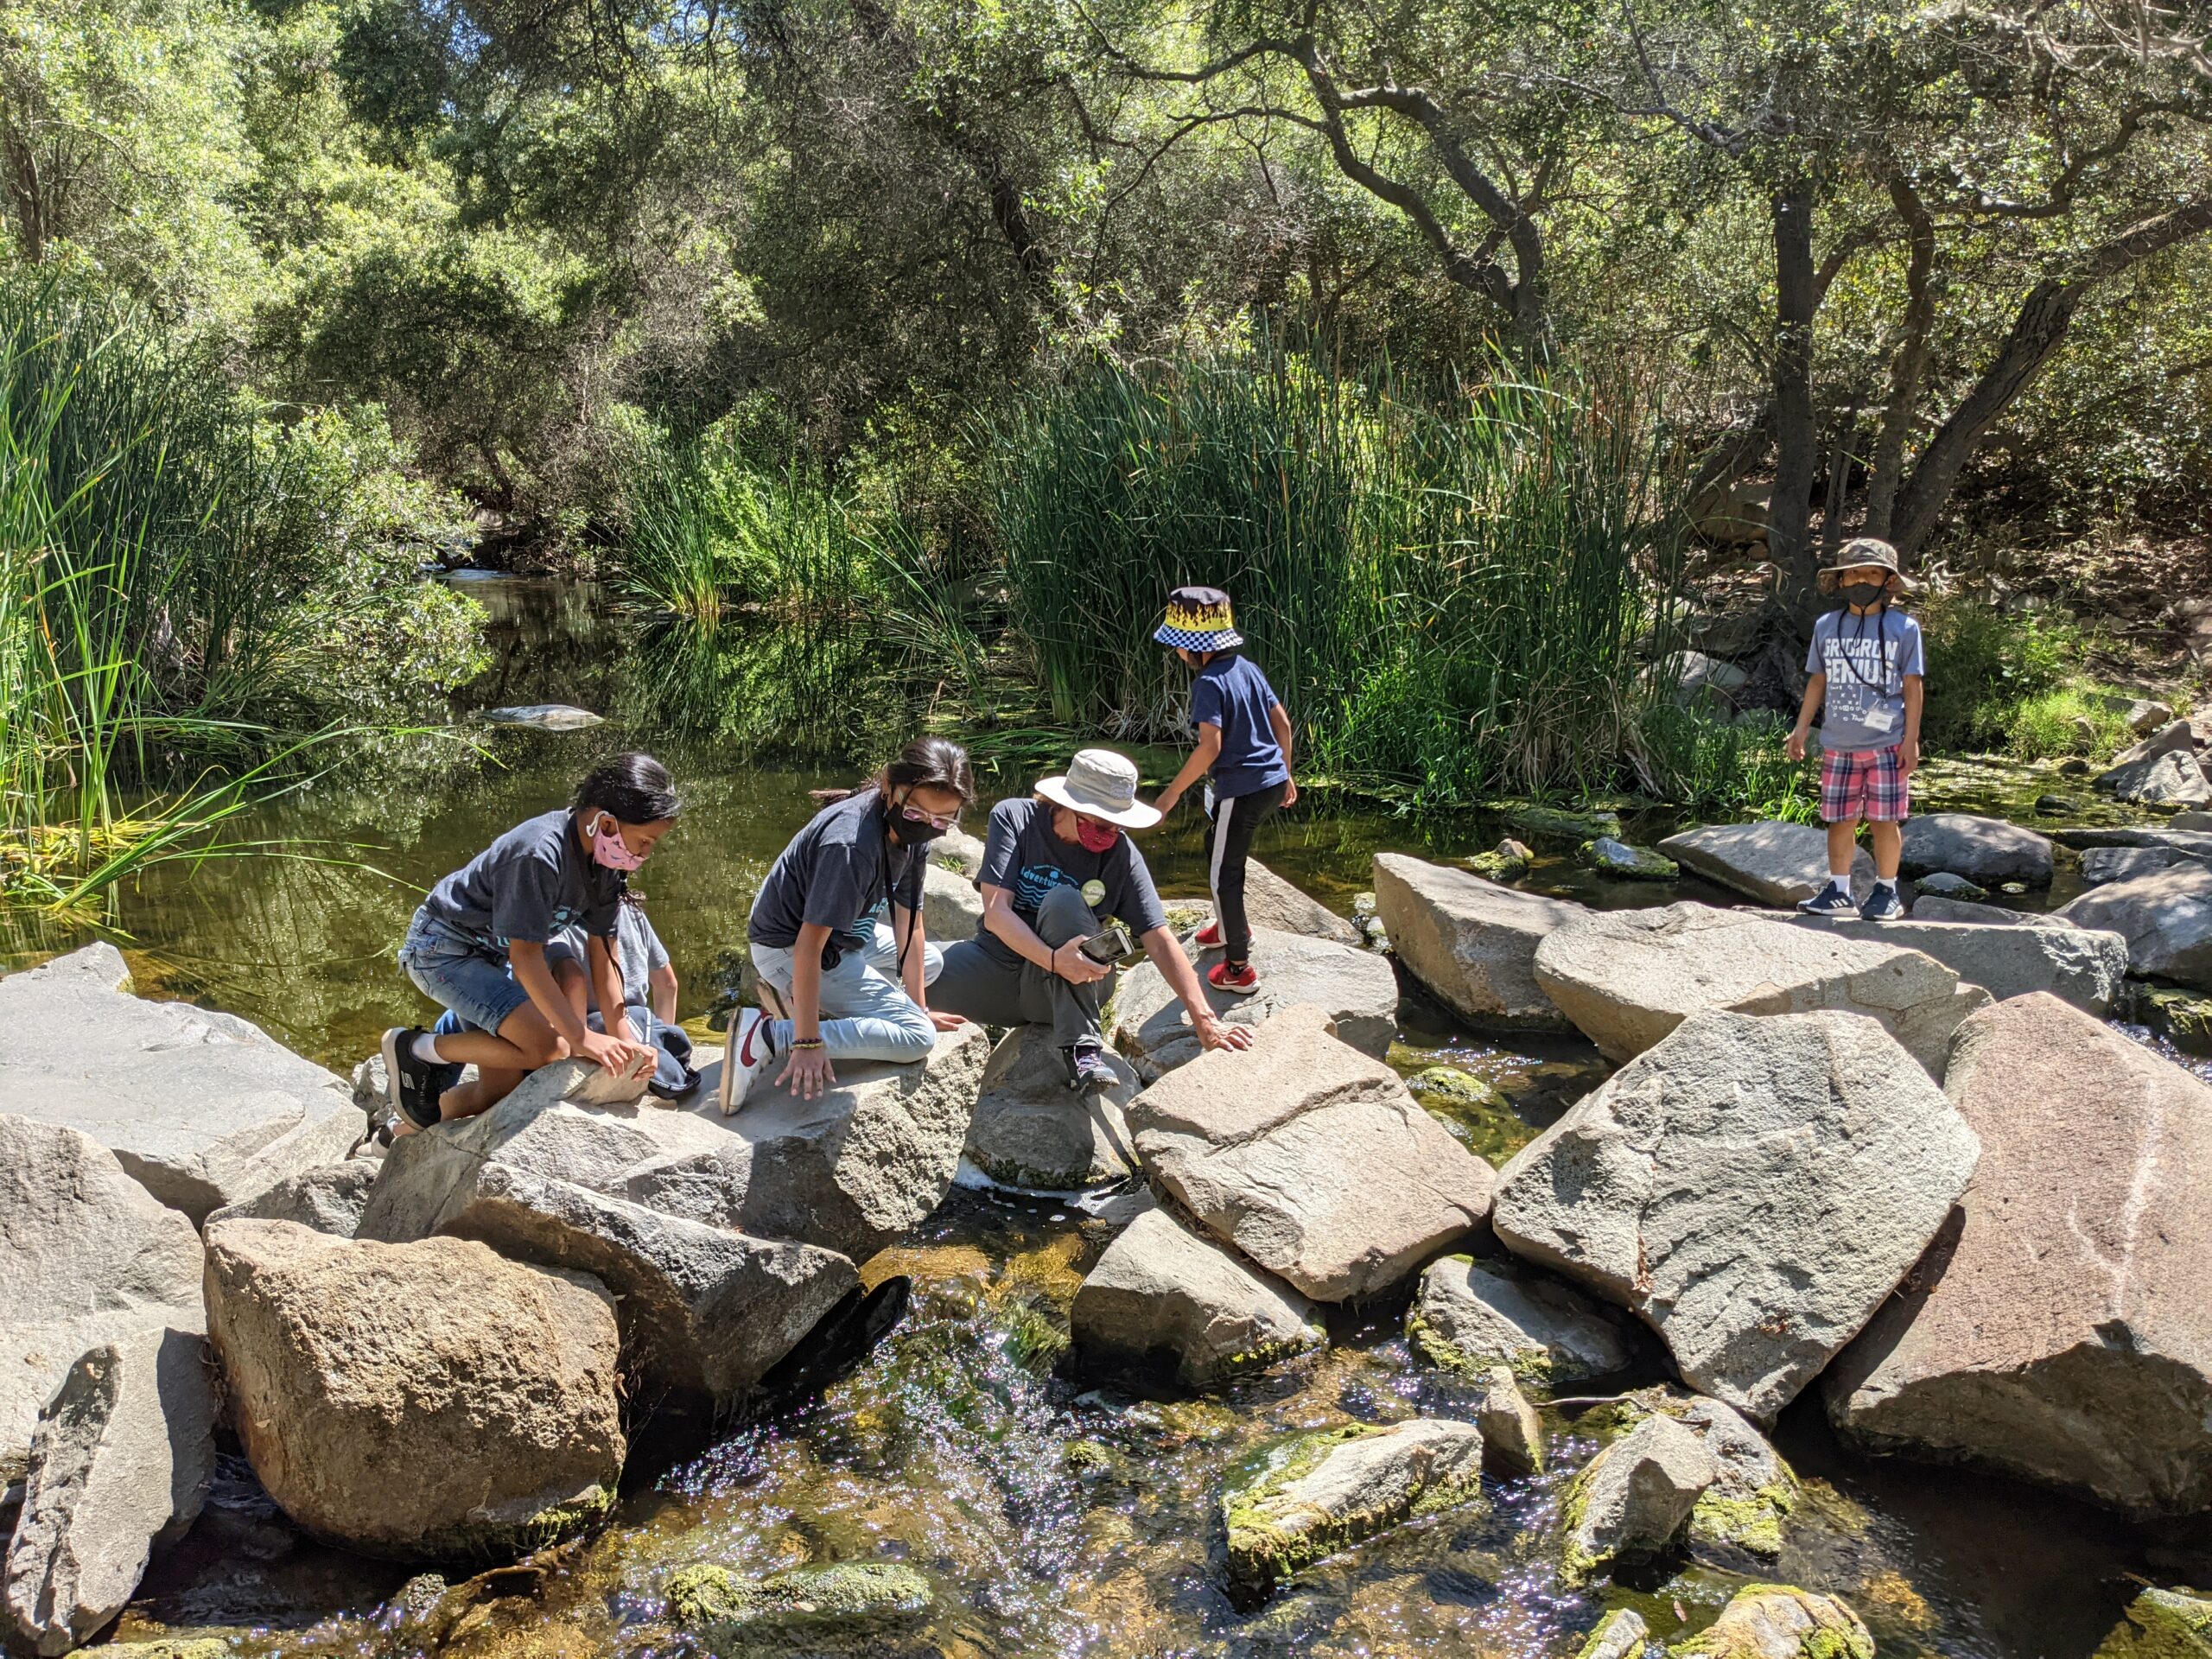 Elementary students climbing on boulders across a stream with trees in the background.